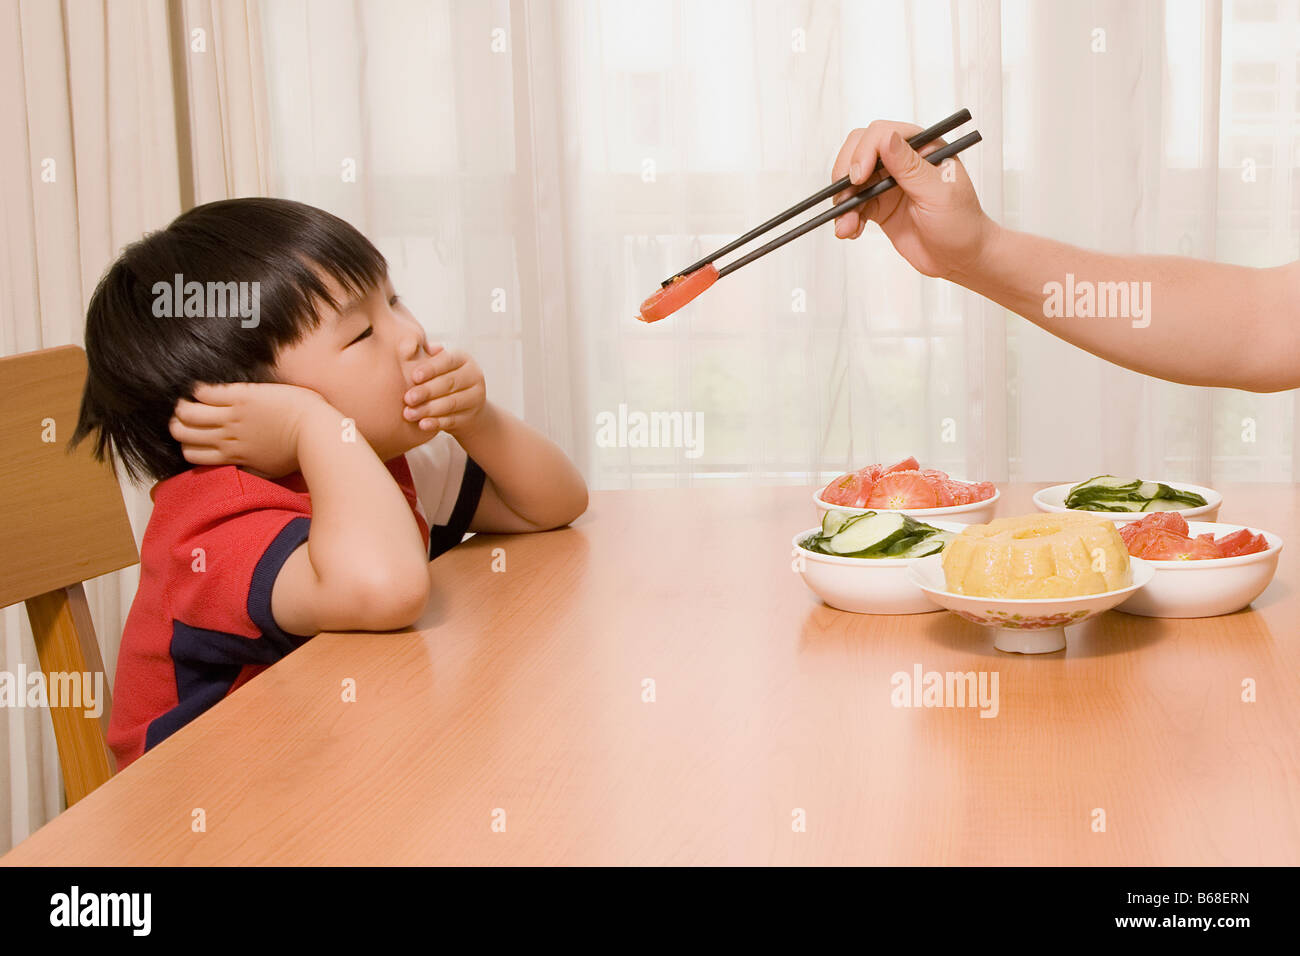 Person's hand holding chopsticks and feeding a boy Stock Photo